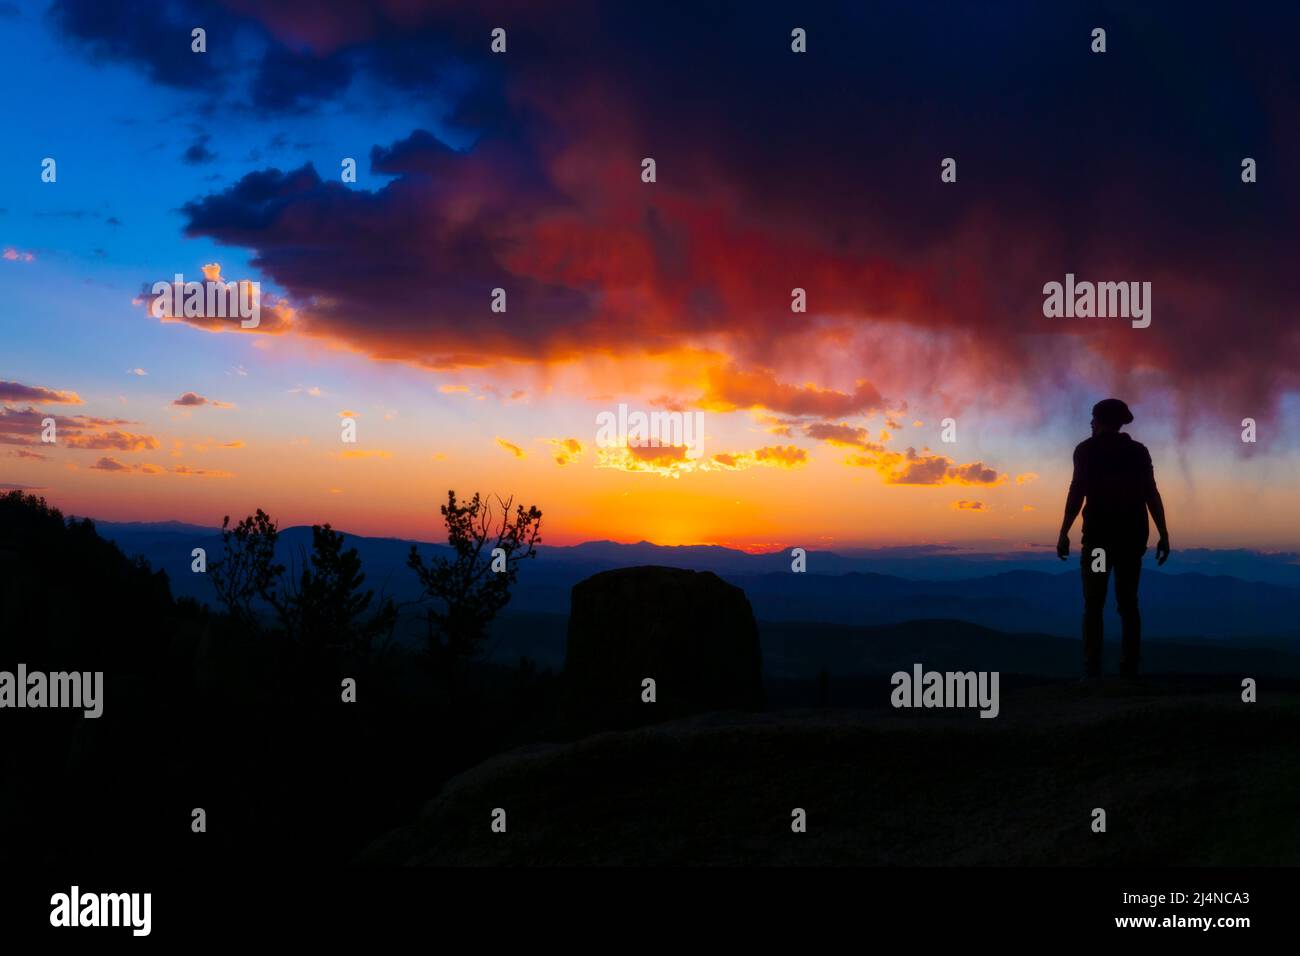 Silhouette Watching Sunrise Sunset From Mountain Top Stock Photo